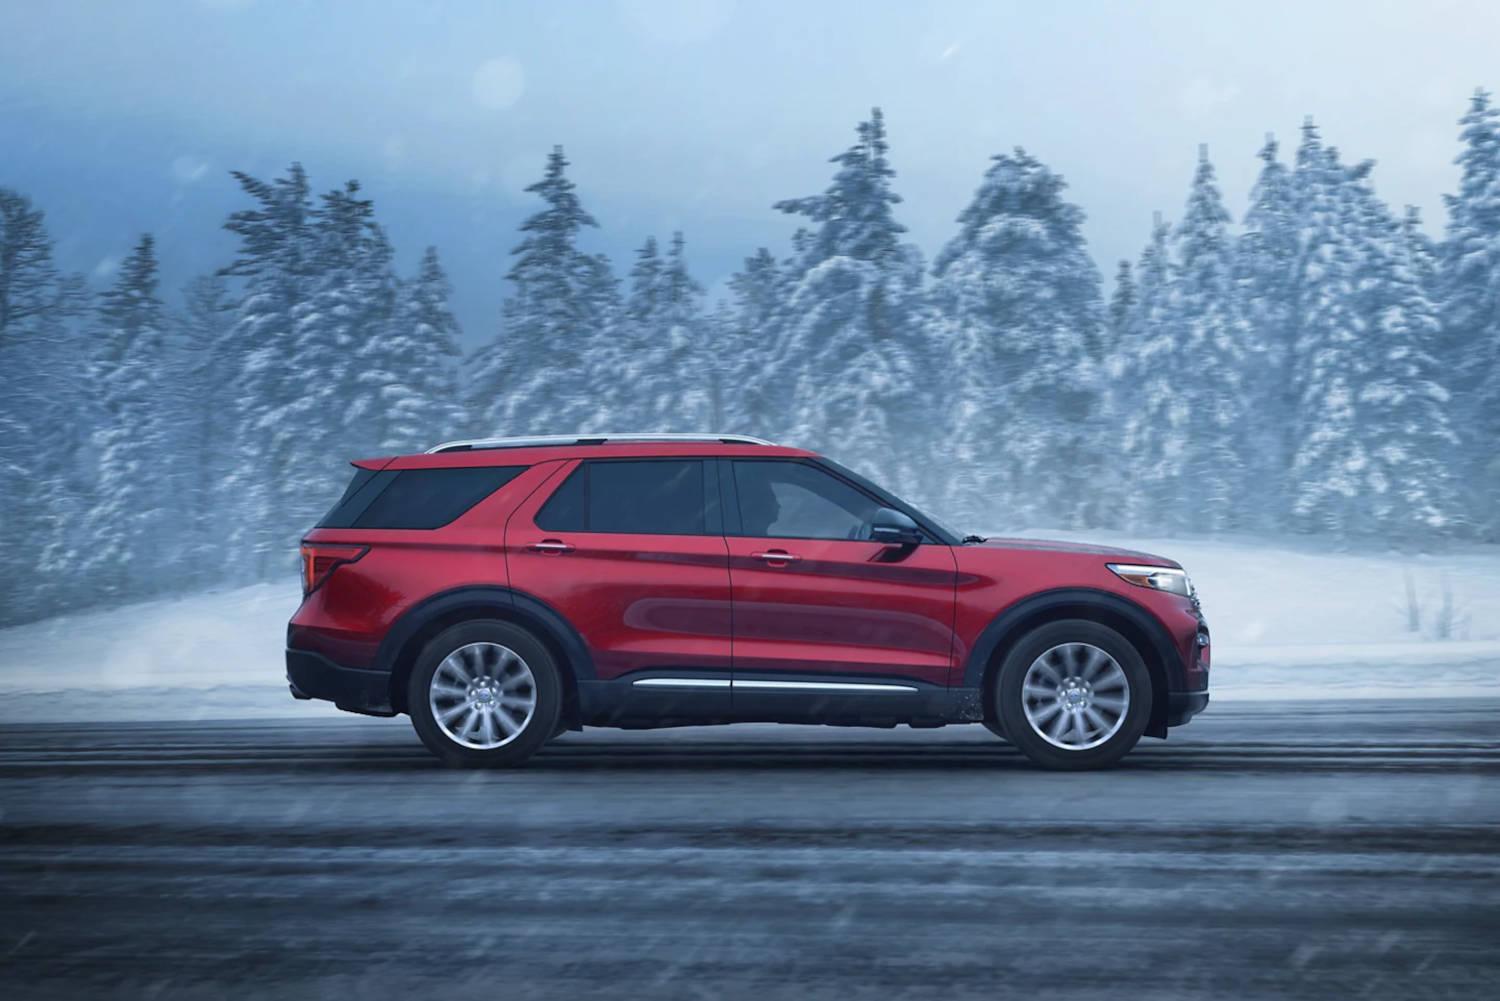 The 2022 Ford Explorer outshines the 2023 Ford Explorer